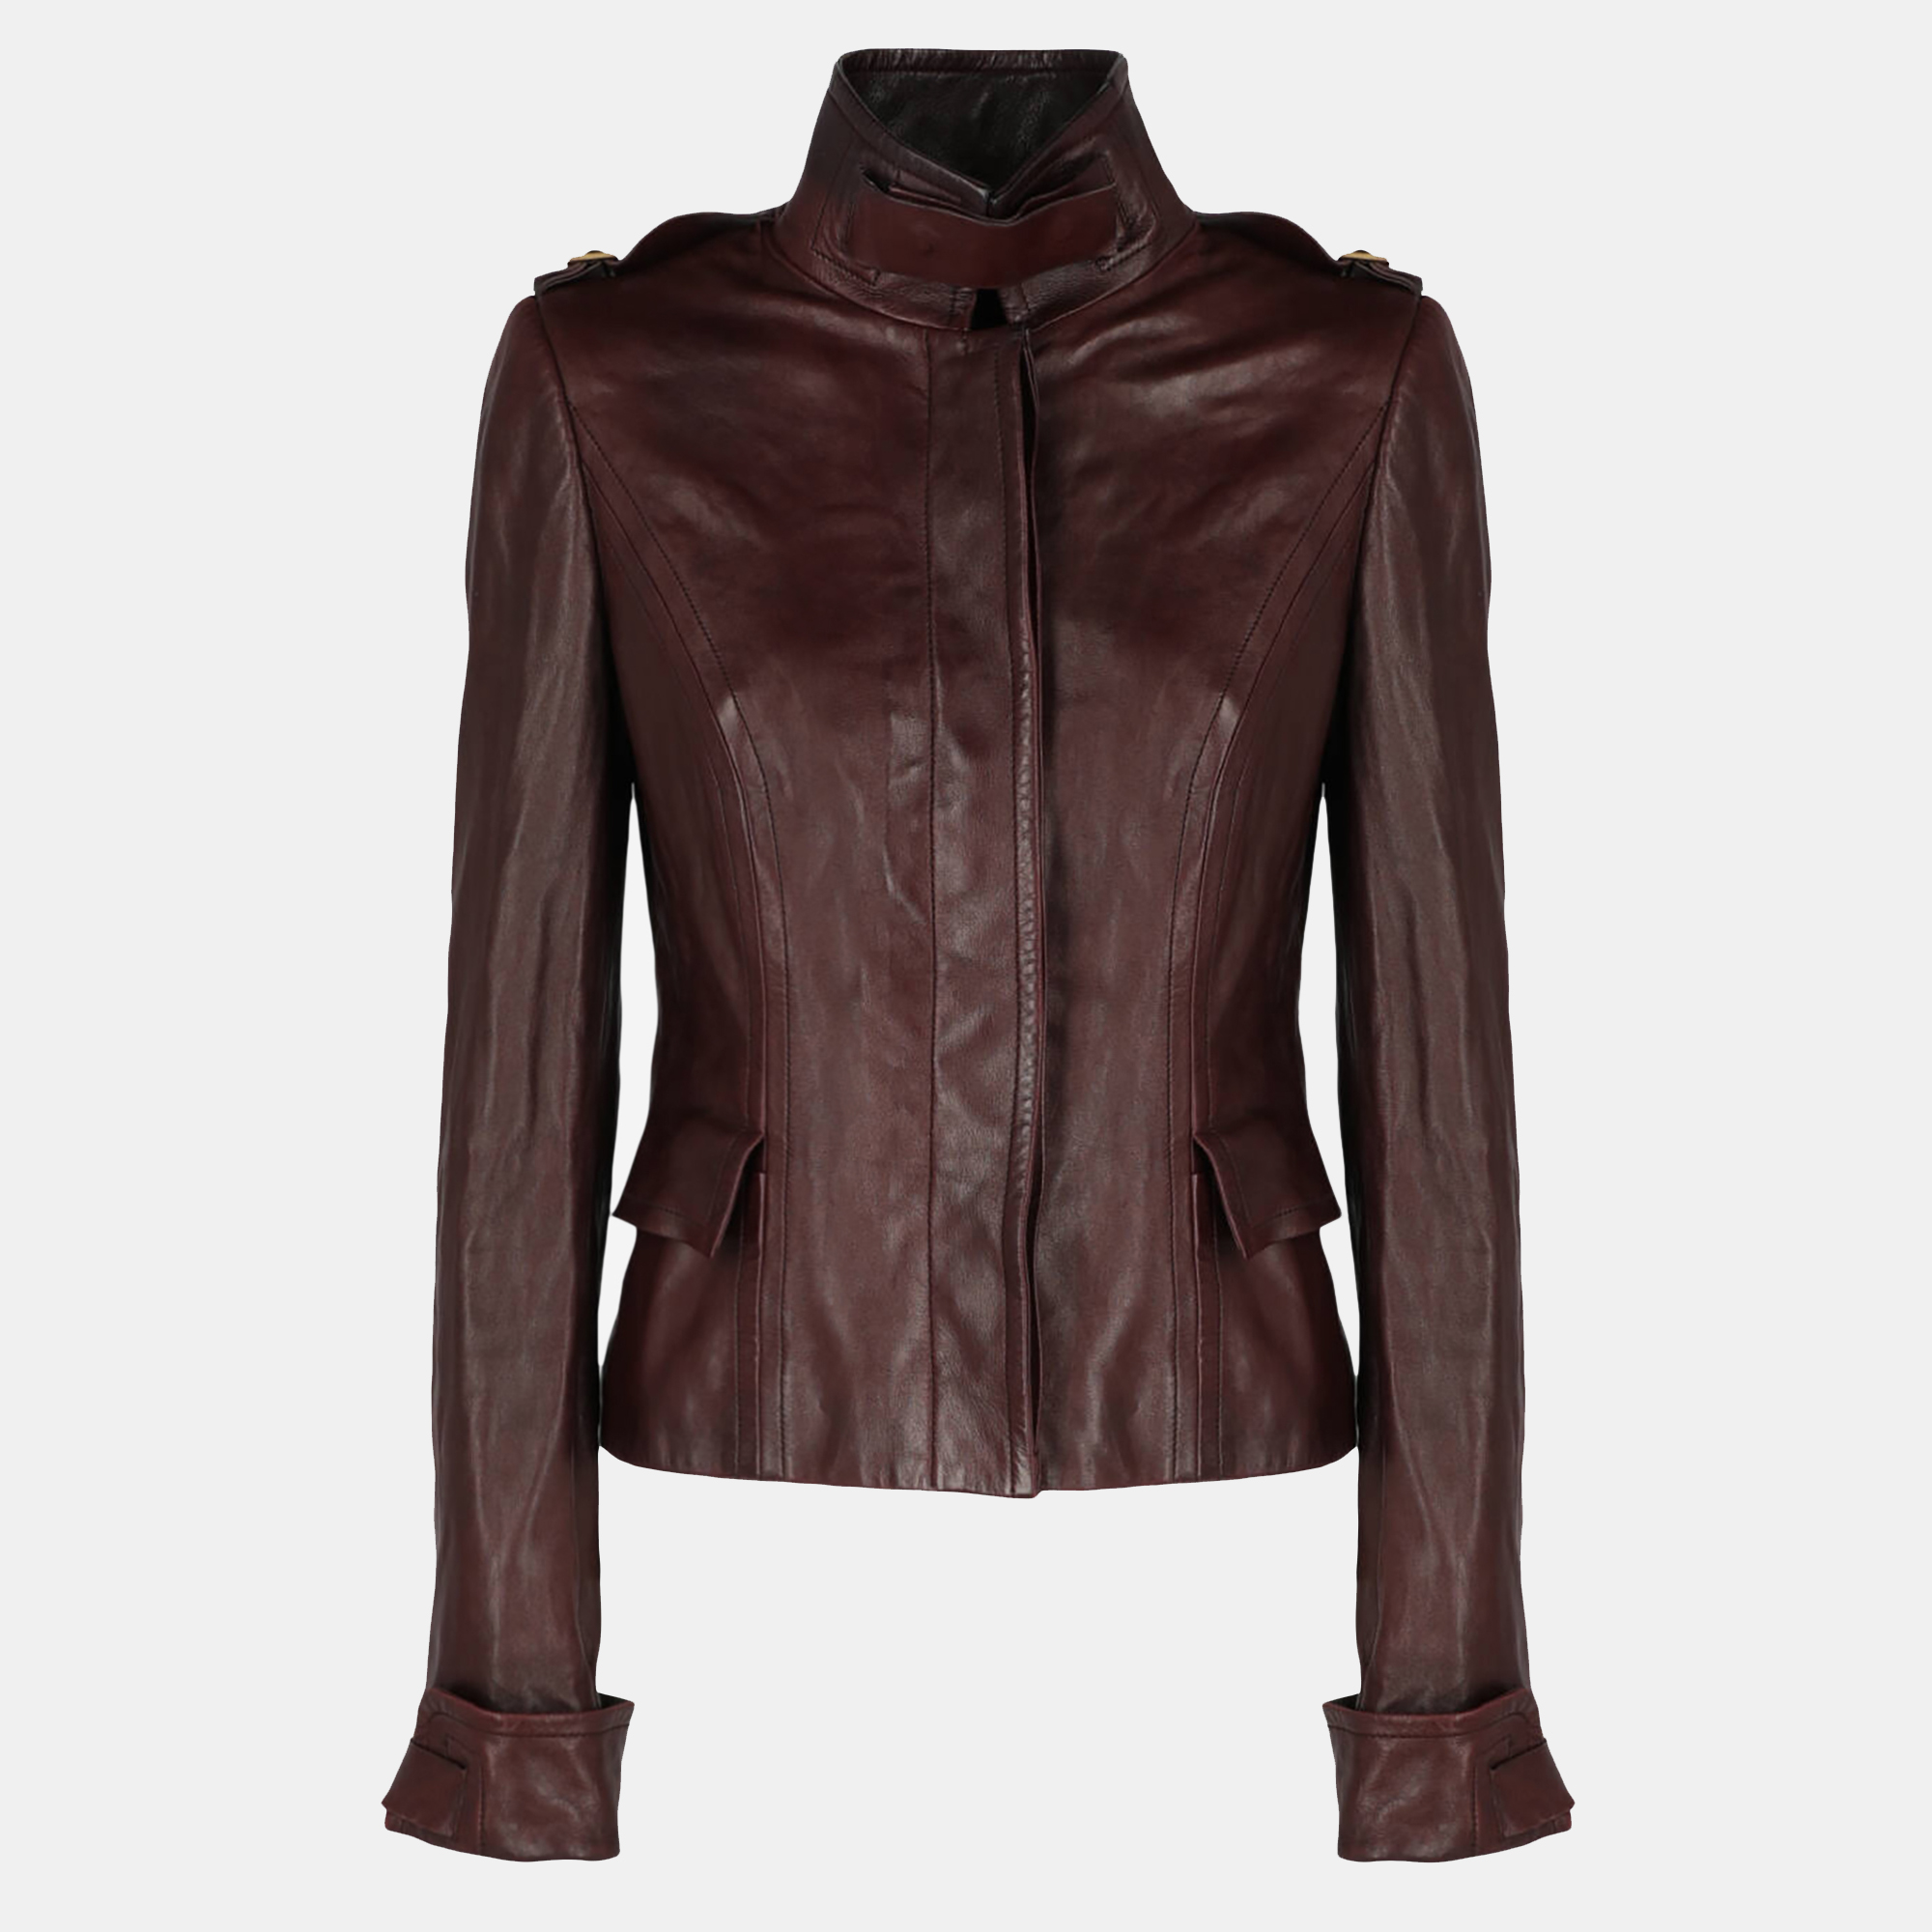 Gucci  Women's Leather Jacket - Burgundy - S